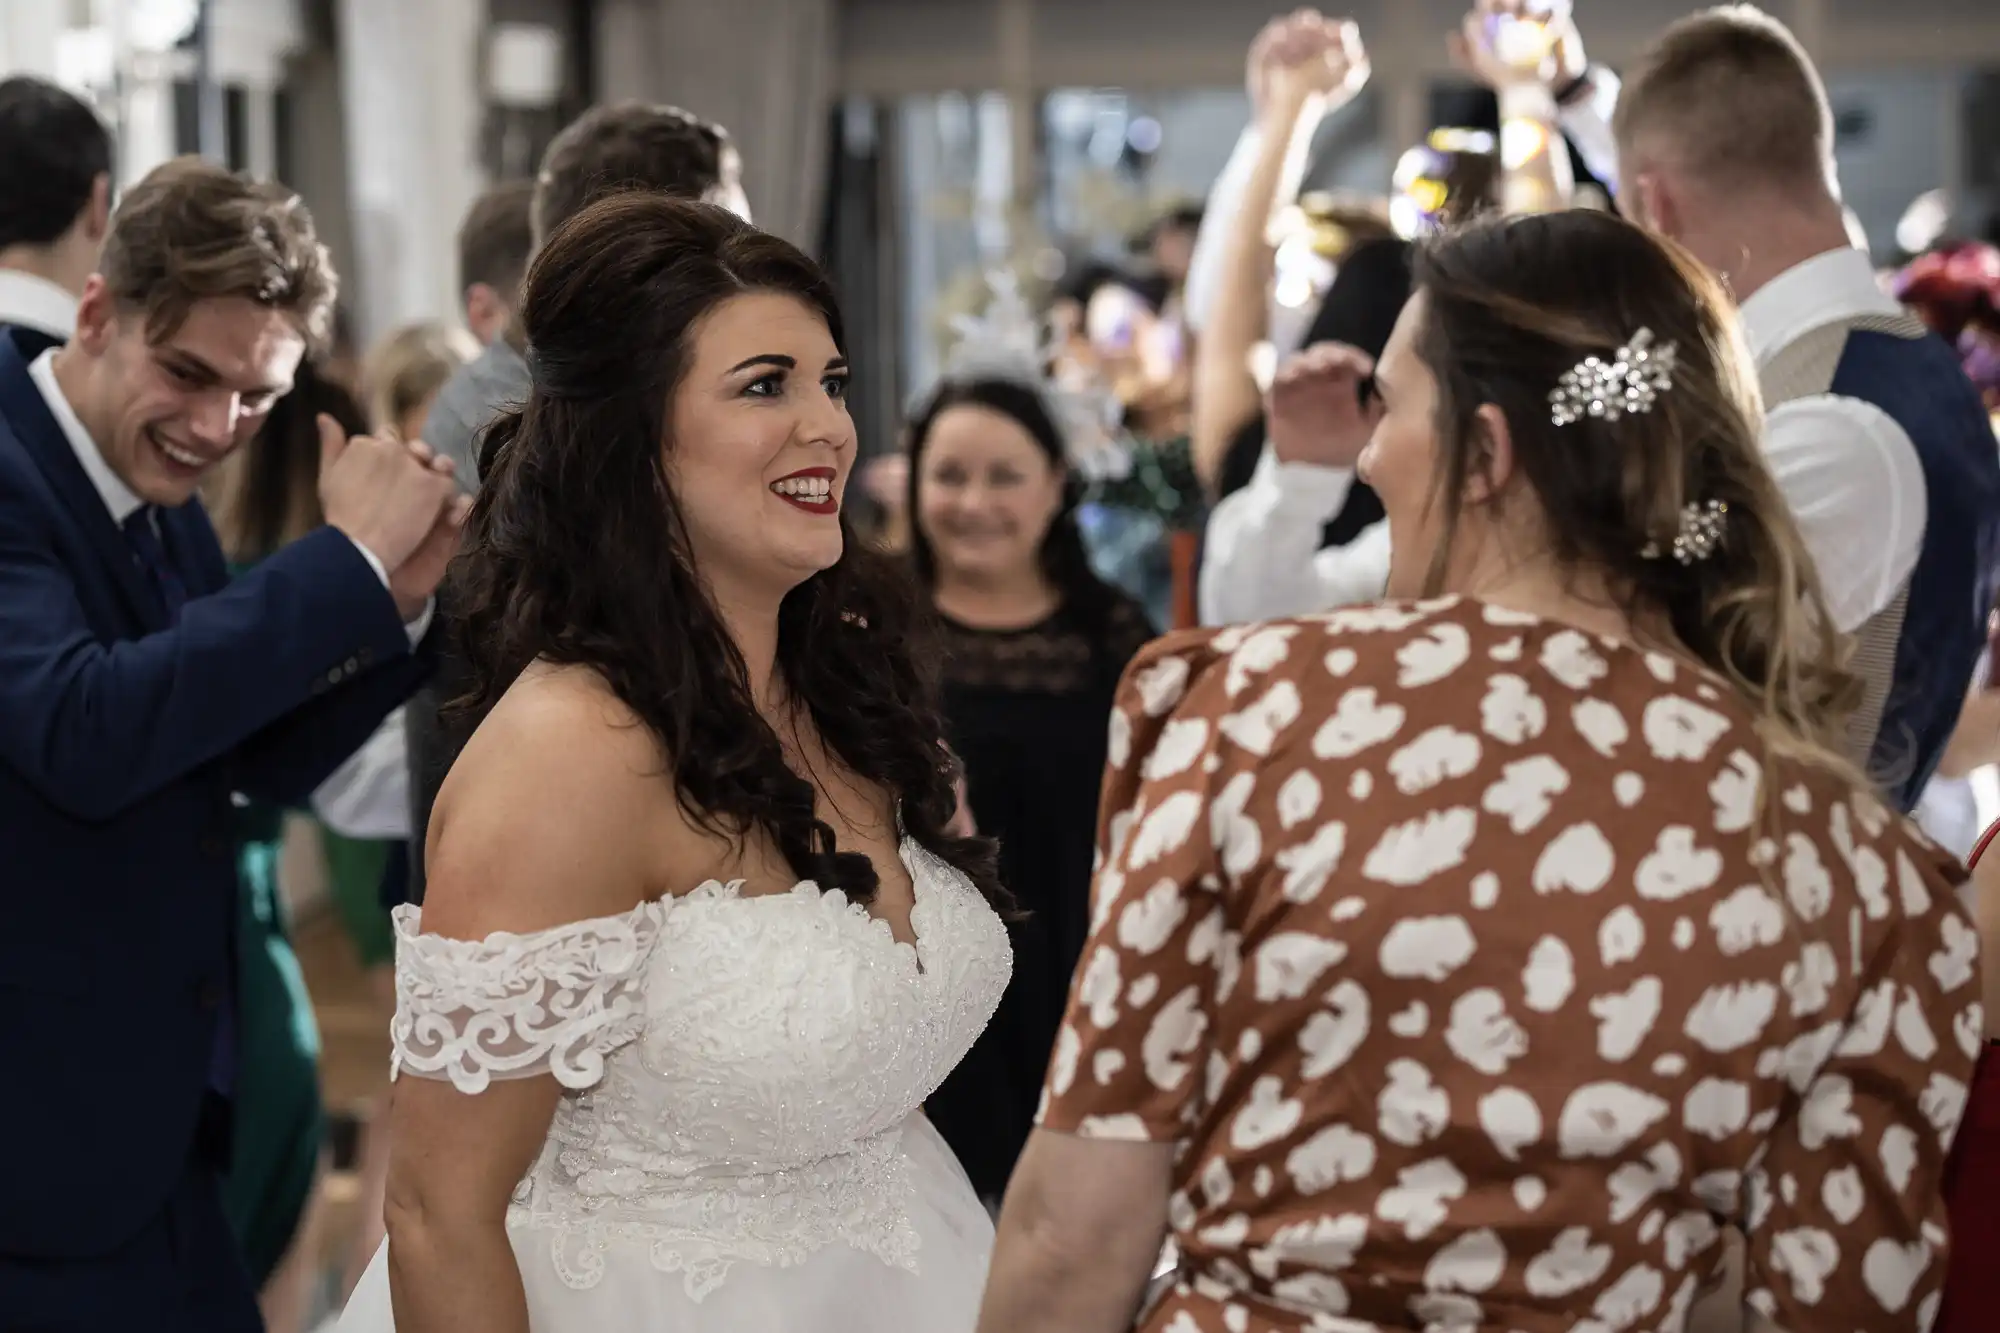 A bride in a white dress is smiling and talking to a guest in a brown patterned dress at a wedding reception. People are dancing in the background.